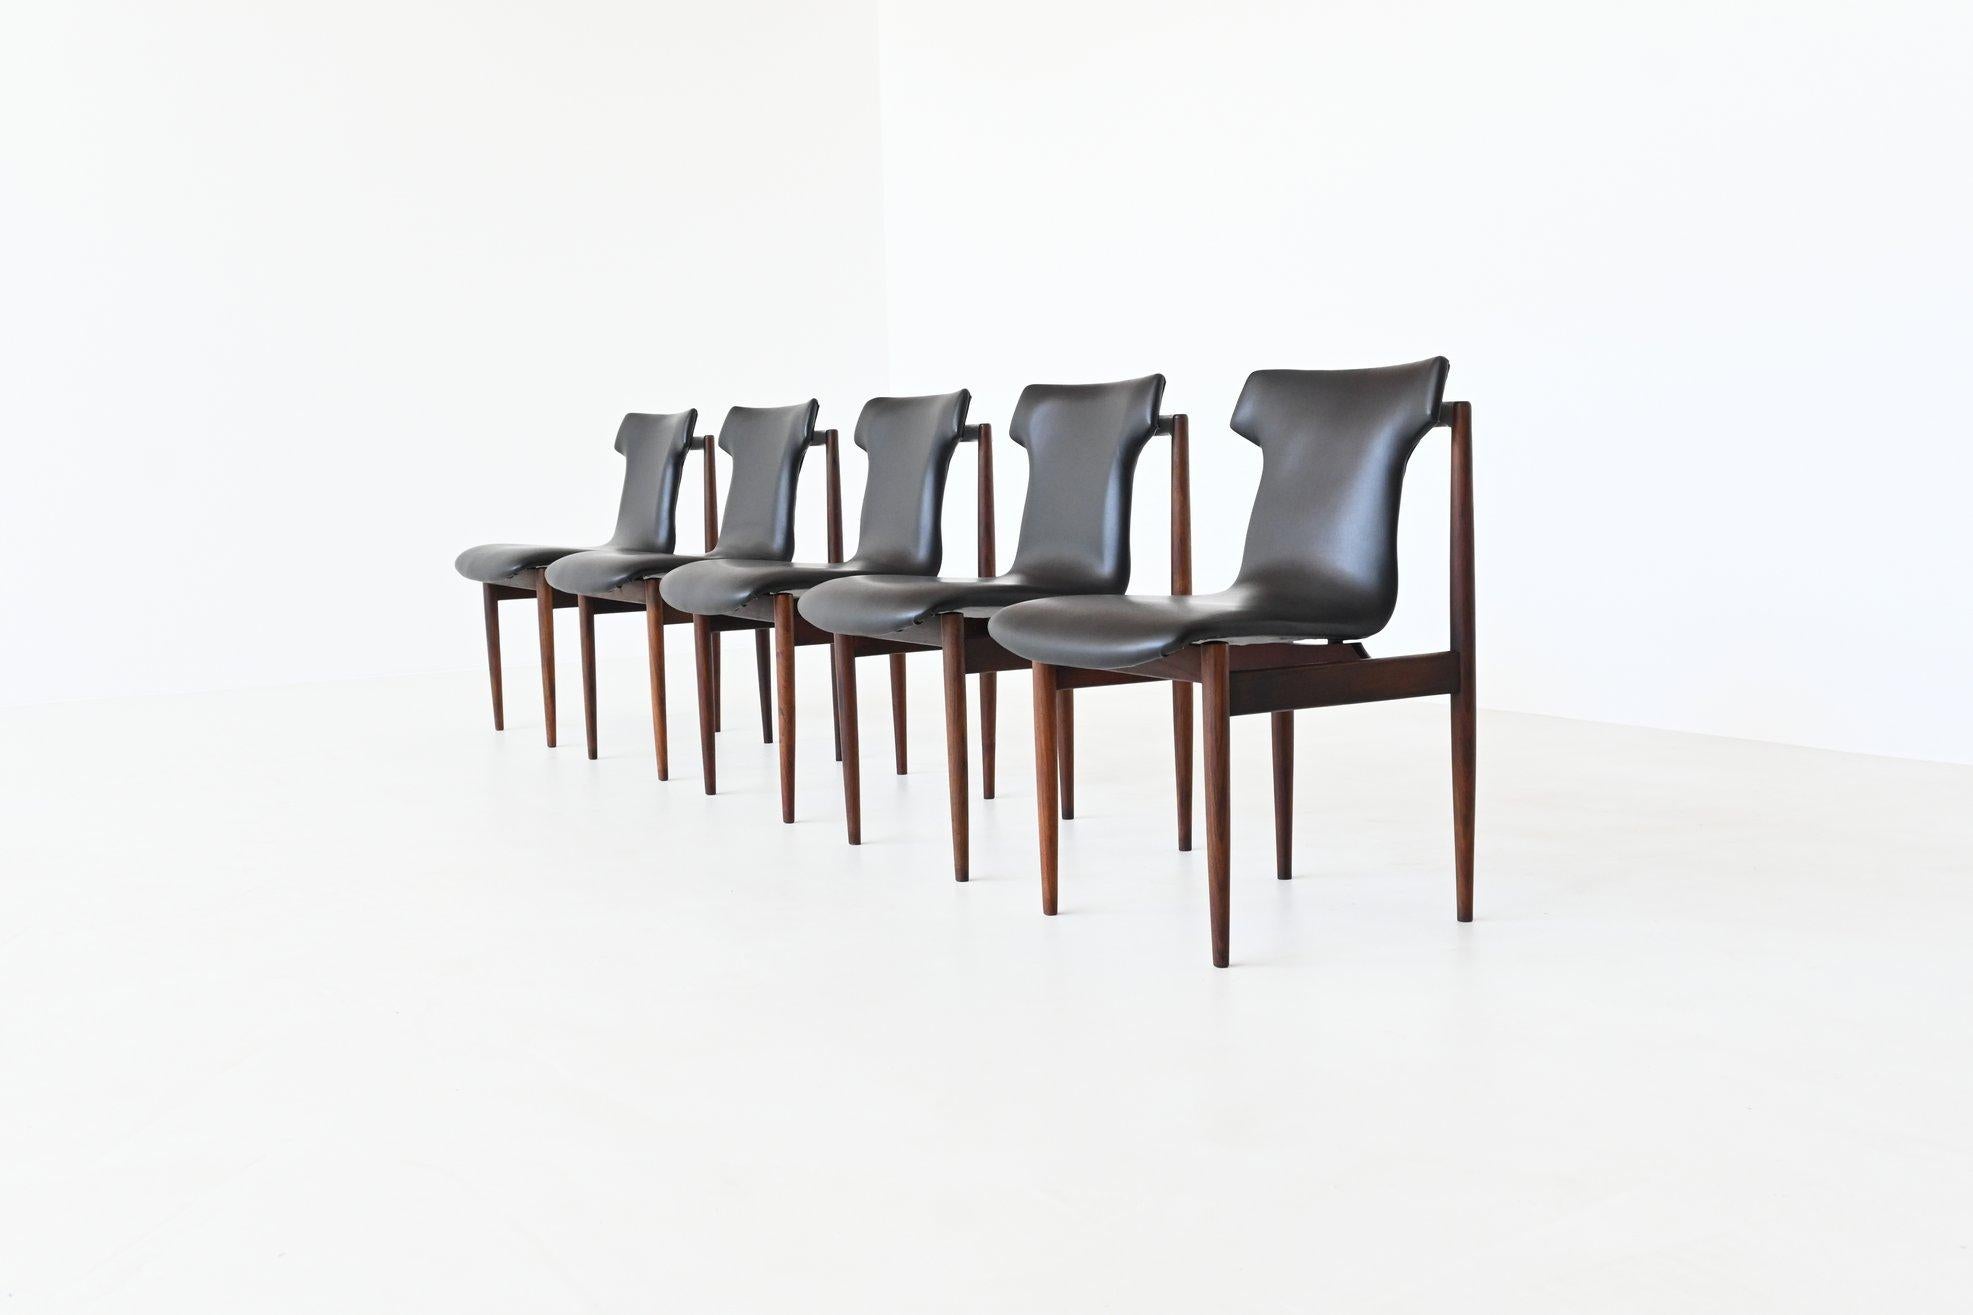 Fantastic set of five sculptural dining chairs model IK designed by Inger Klingenberg and manufactured by Fristho Franeker, The Netherlands 1960. The chair was innovative because the seat and back were detached from the frame. The frames are made of